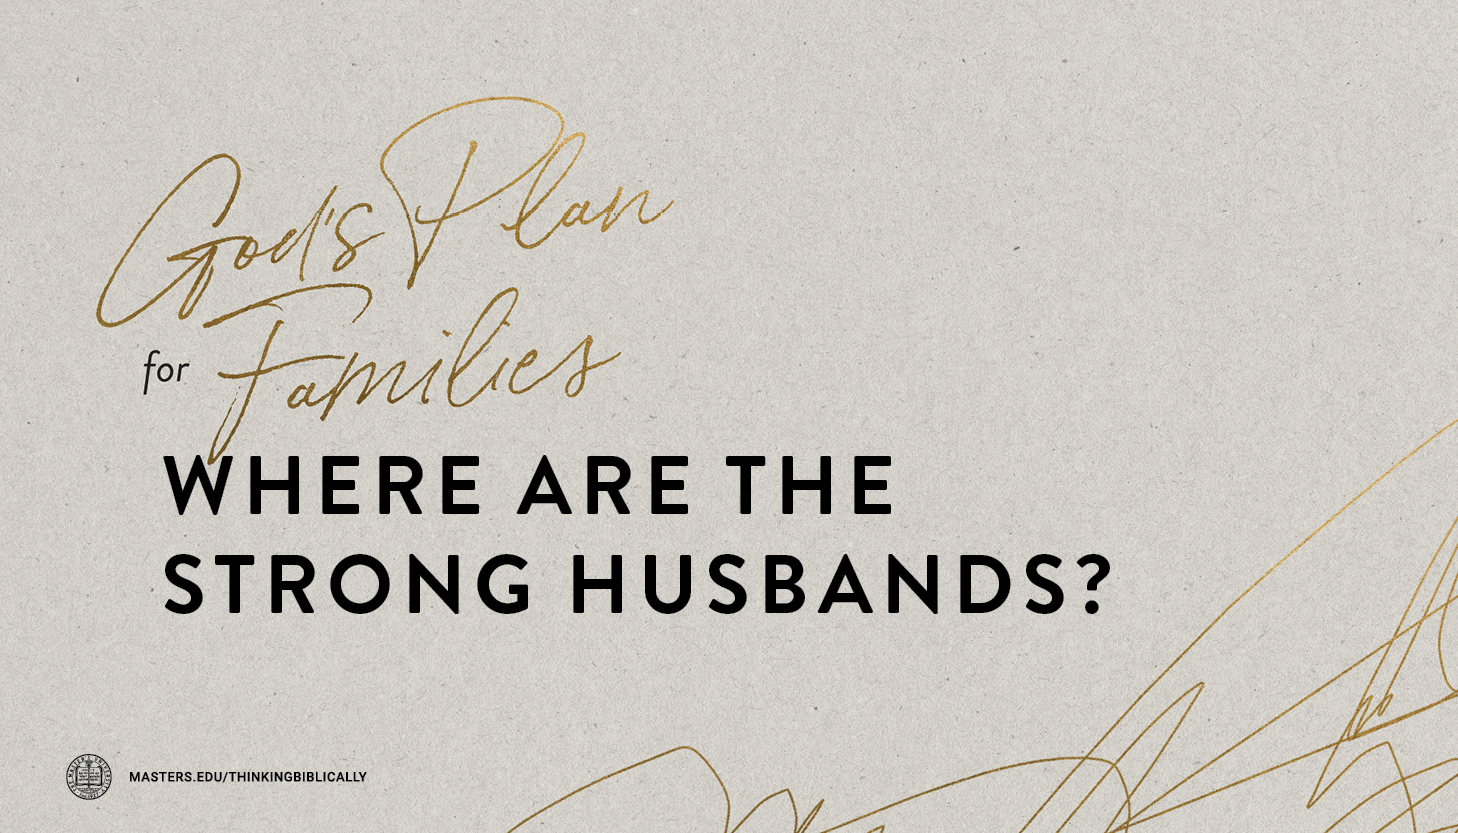 Where Are the Strong Husbands?